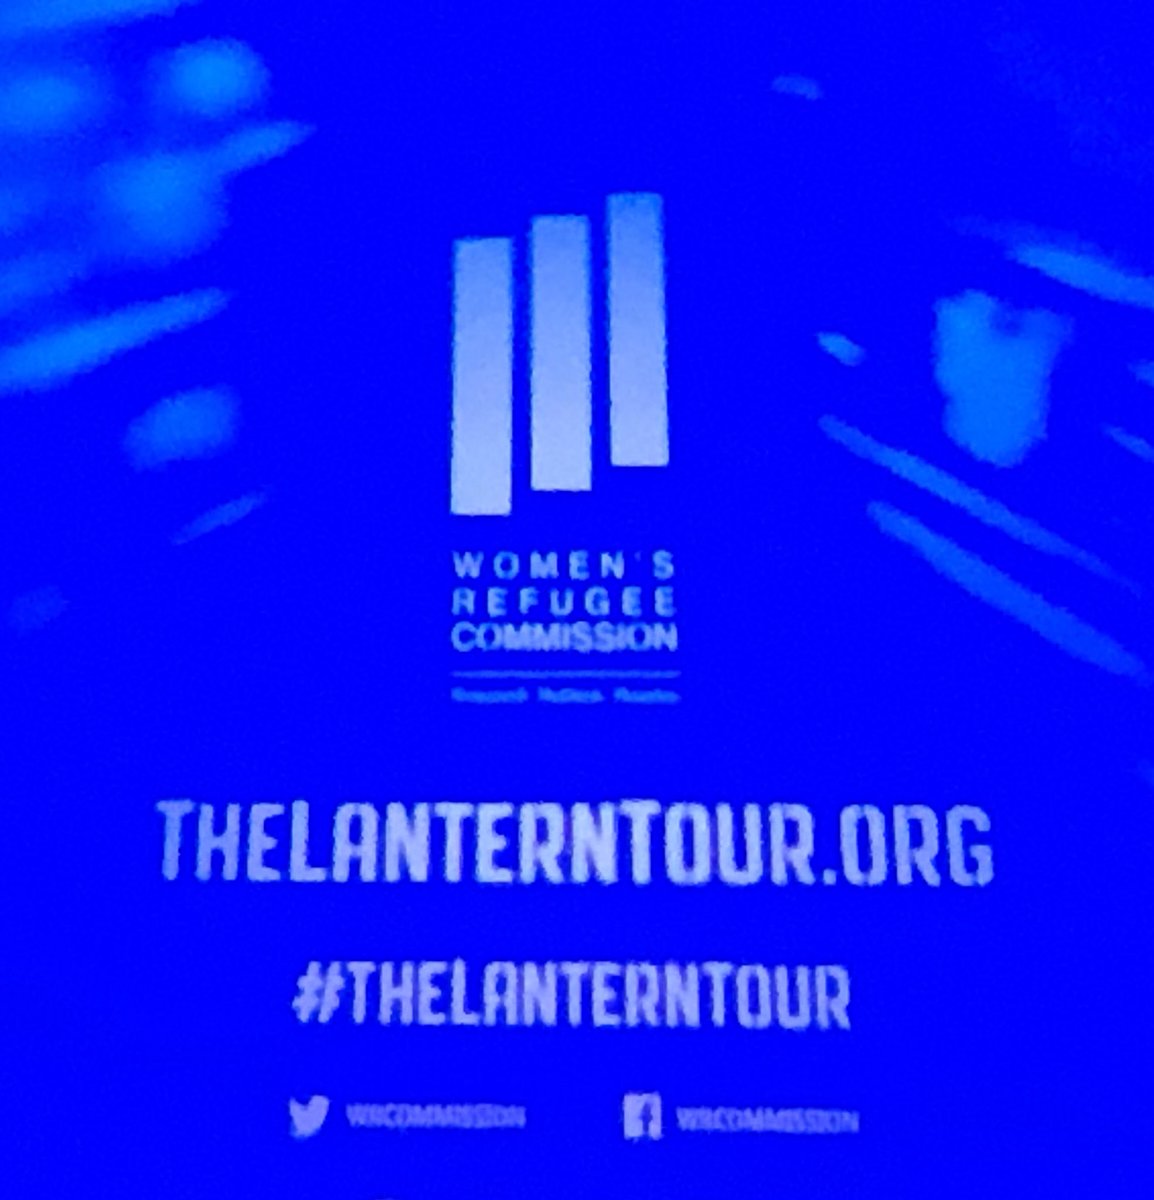 Delighted to support the ⁦@wrcommission⁩ at the 2019 edition of #thelanterntour!